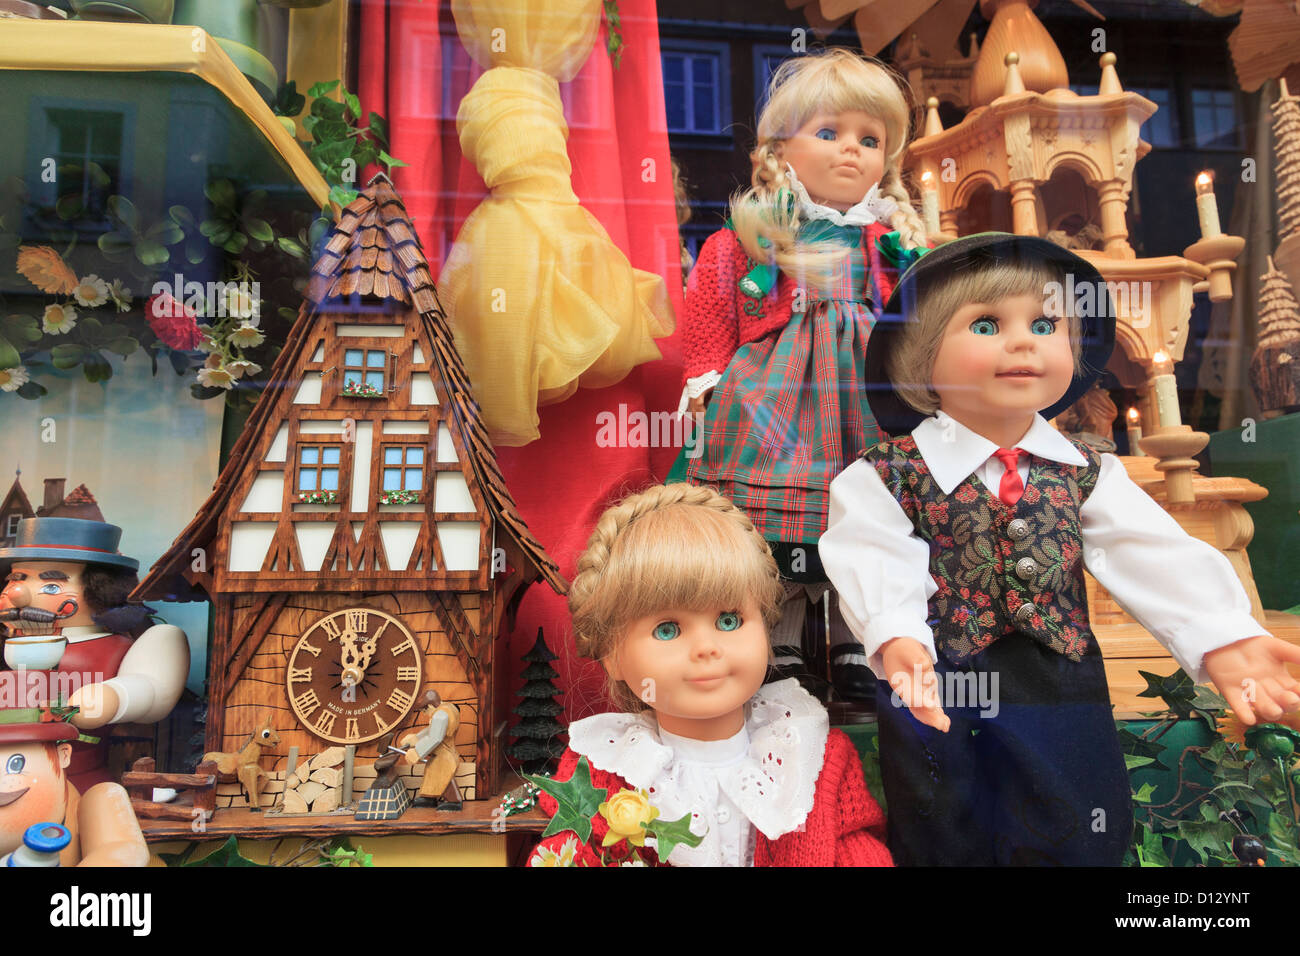 Shop window display of dolls in traditional costume looking through glass. Rothenburg Ob der Tauber, Franconia, Bavaria, Germany Stock Photo